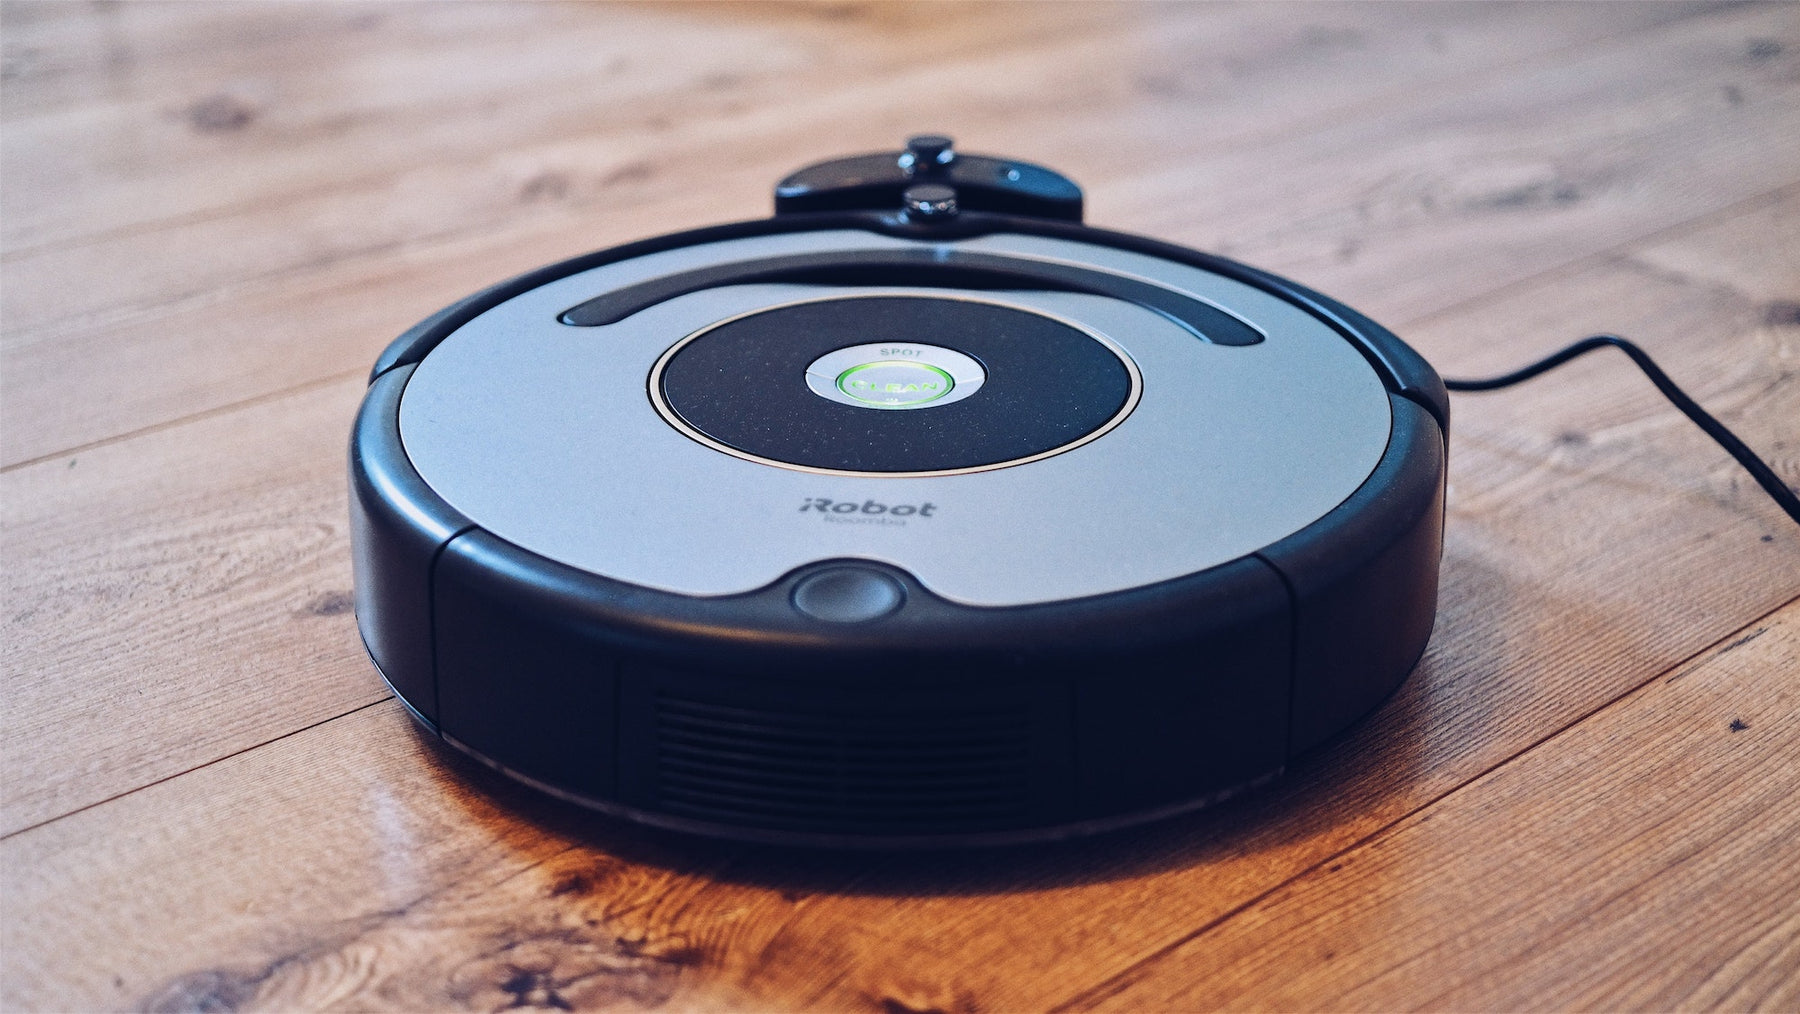 Robot Vacuums: Are They Worth It? Pros and Cons